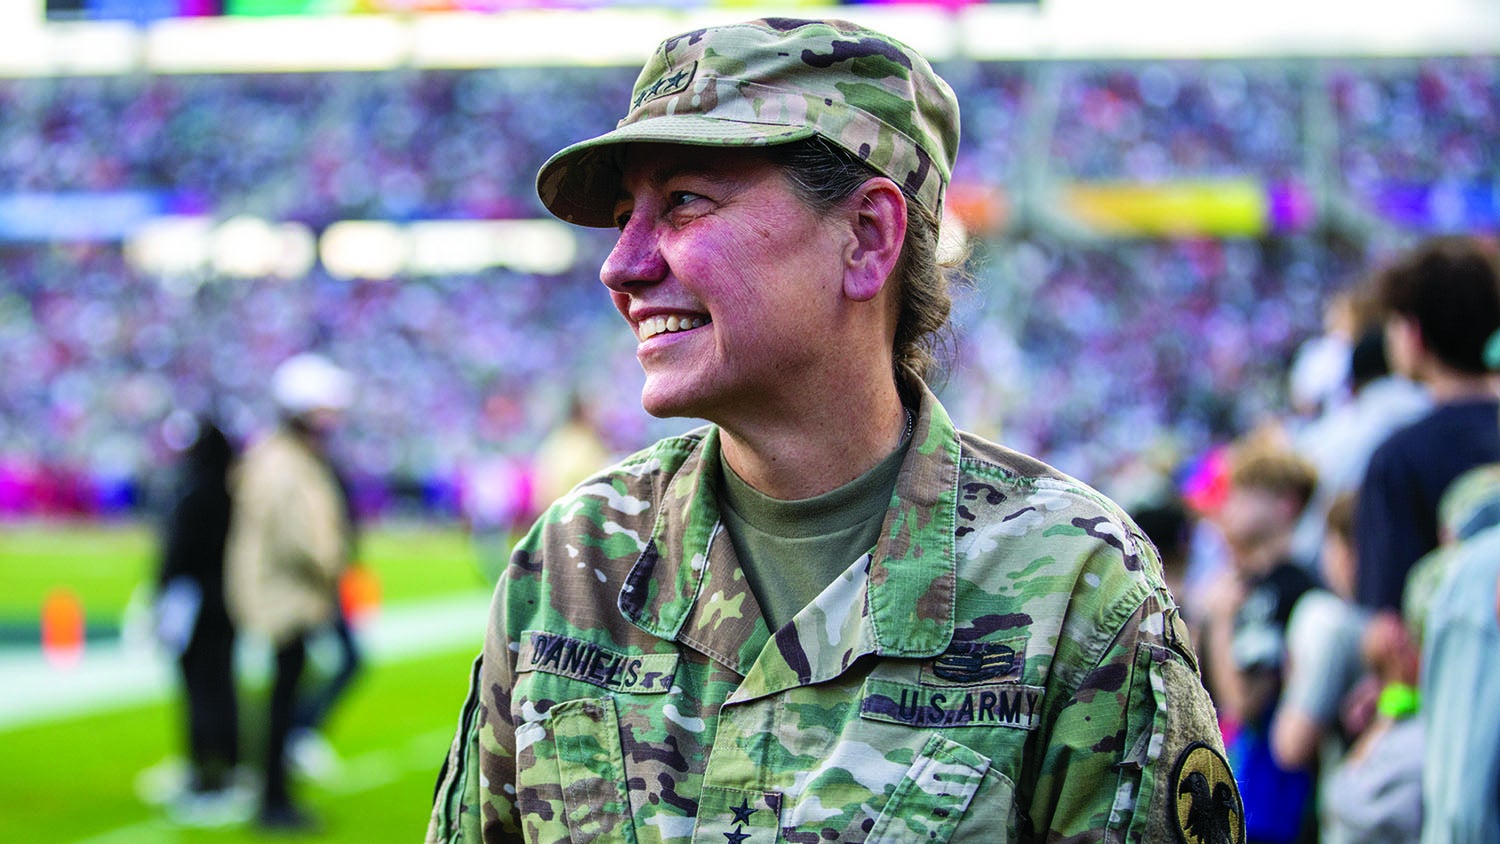 Lt. Gen. Jody Daniels, chief of the U.S. Army Reserve and commanding general of U.S. Army Reserve Command, meets fans at the 2024 NFL Pro Bowl in Orlando, Florida, in February. (Credit: U.S. Army/Spc. Danielle Sturgill)